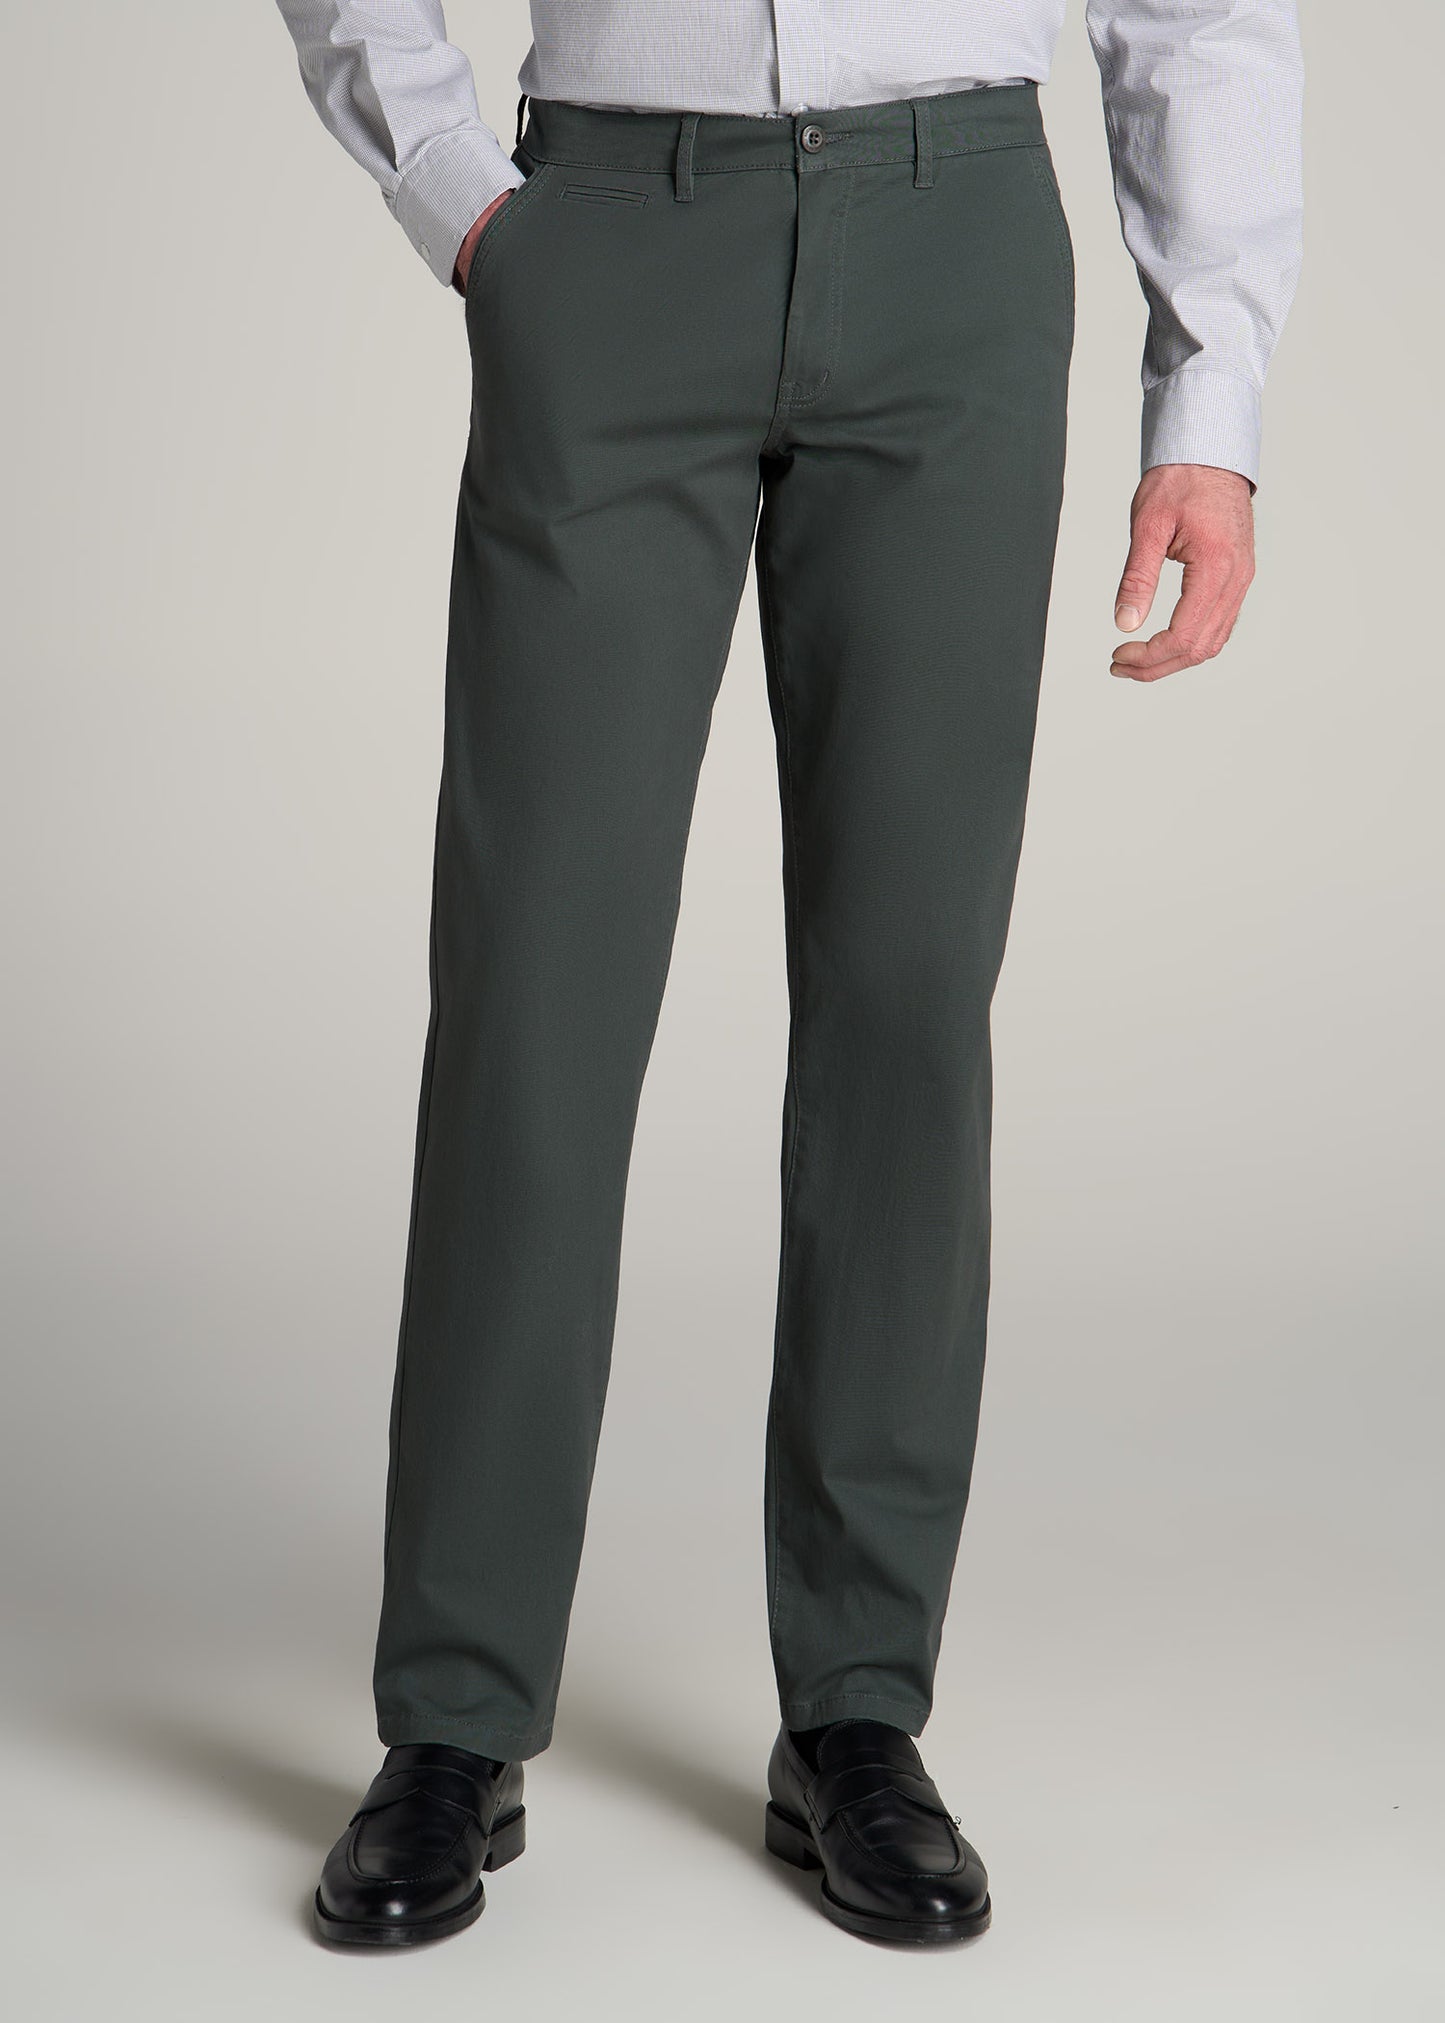 J1 Straight Fit Chino Pant Men's in Soft Green